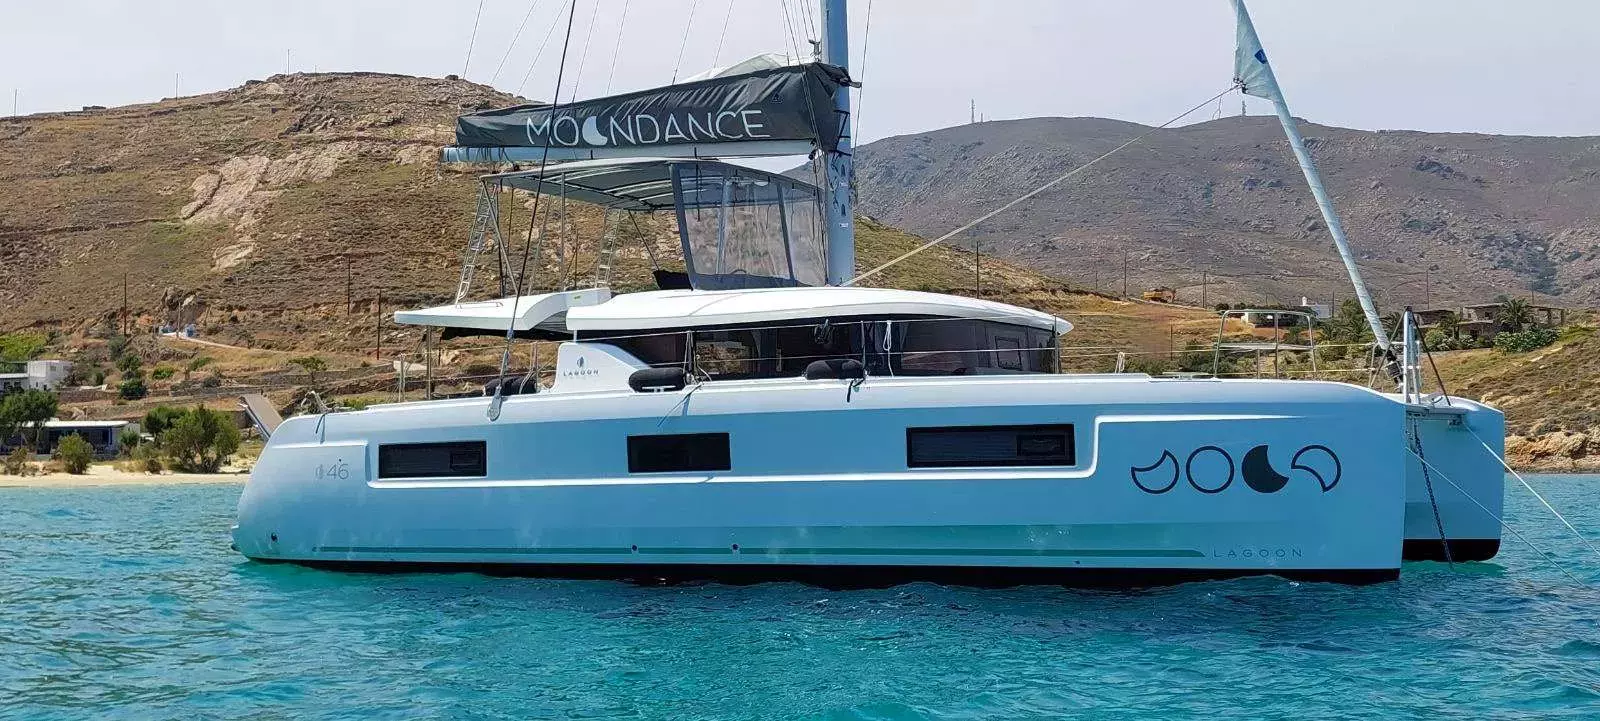 Moondance III by Lagoon - Top rates for a Rental of a private Power Catamaran in Cyprus